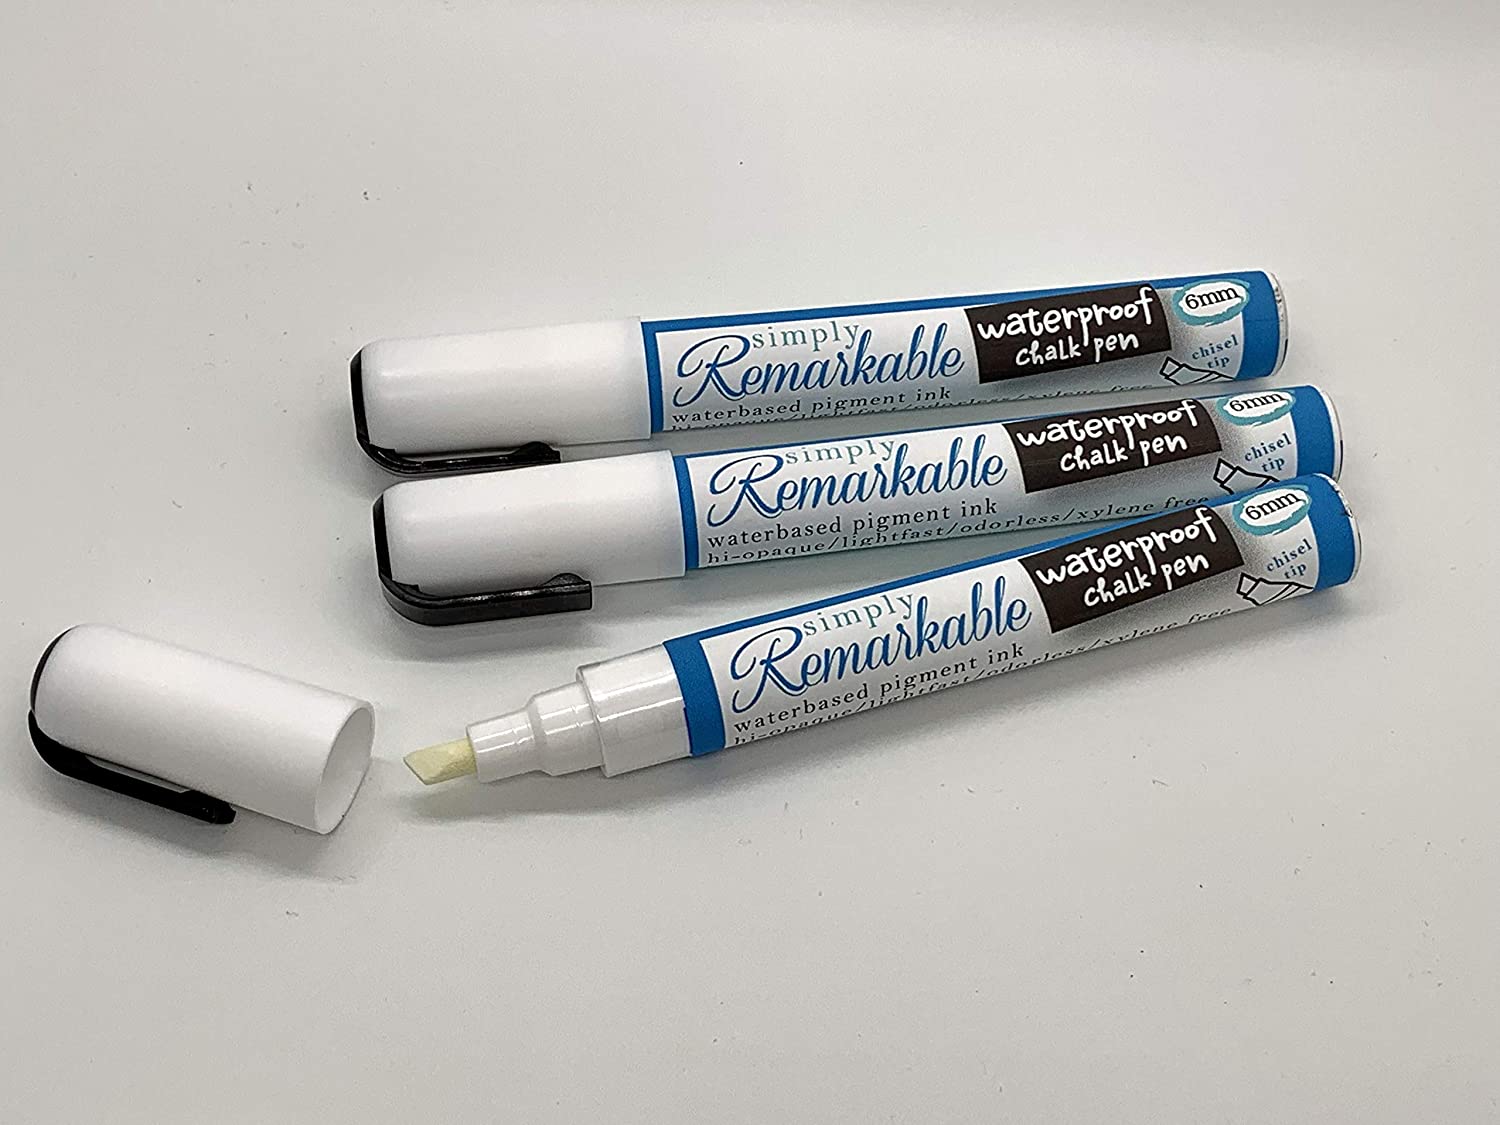 Waterproof Chalk Pen to Write or Draw Custom Labels, Tags and More